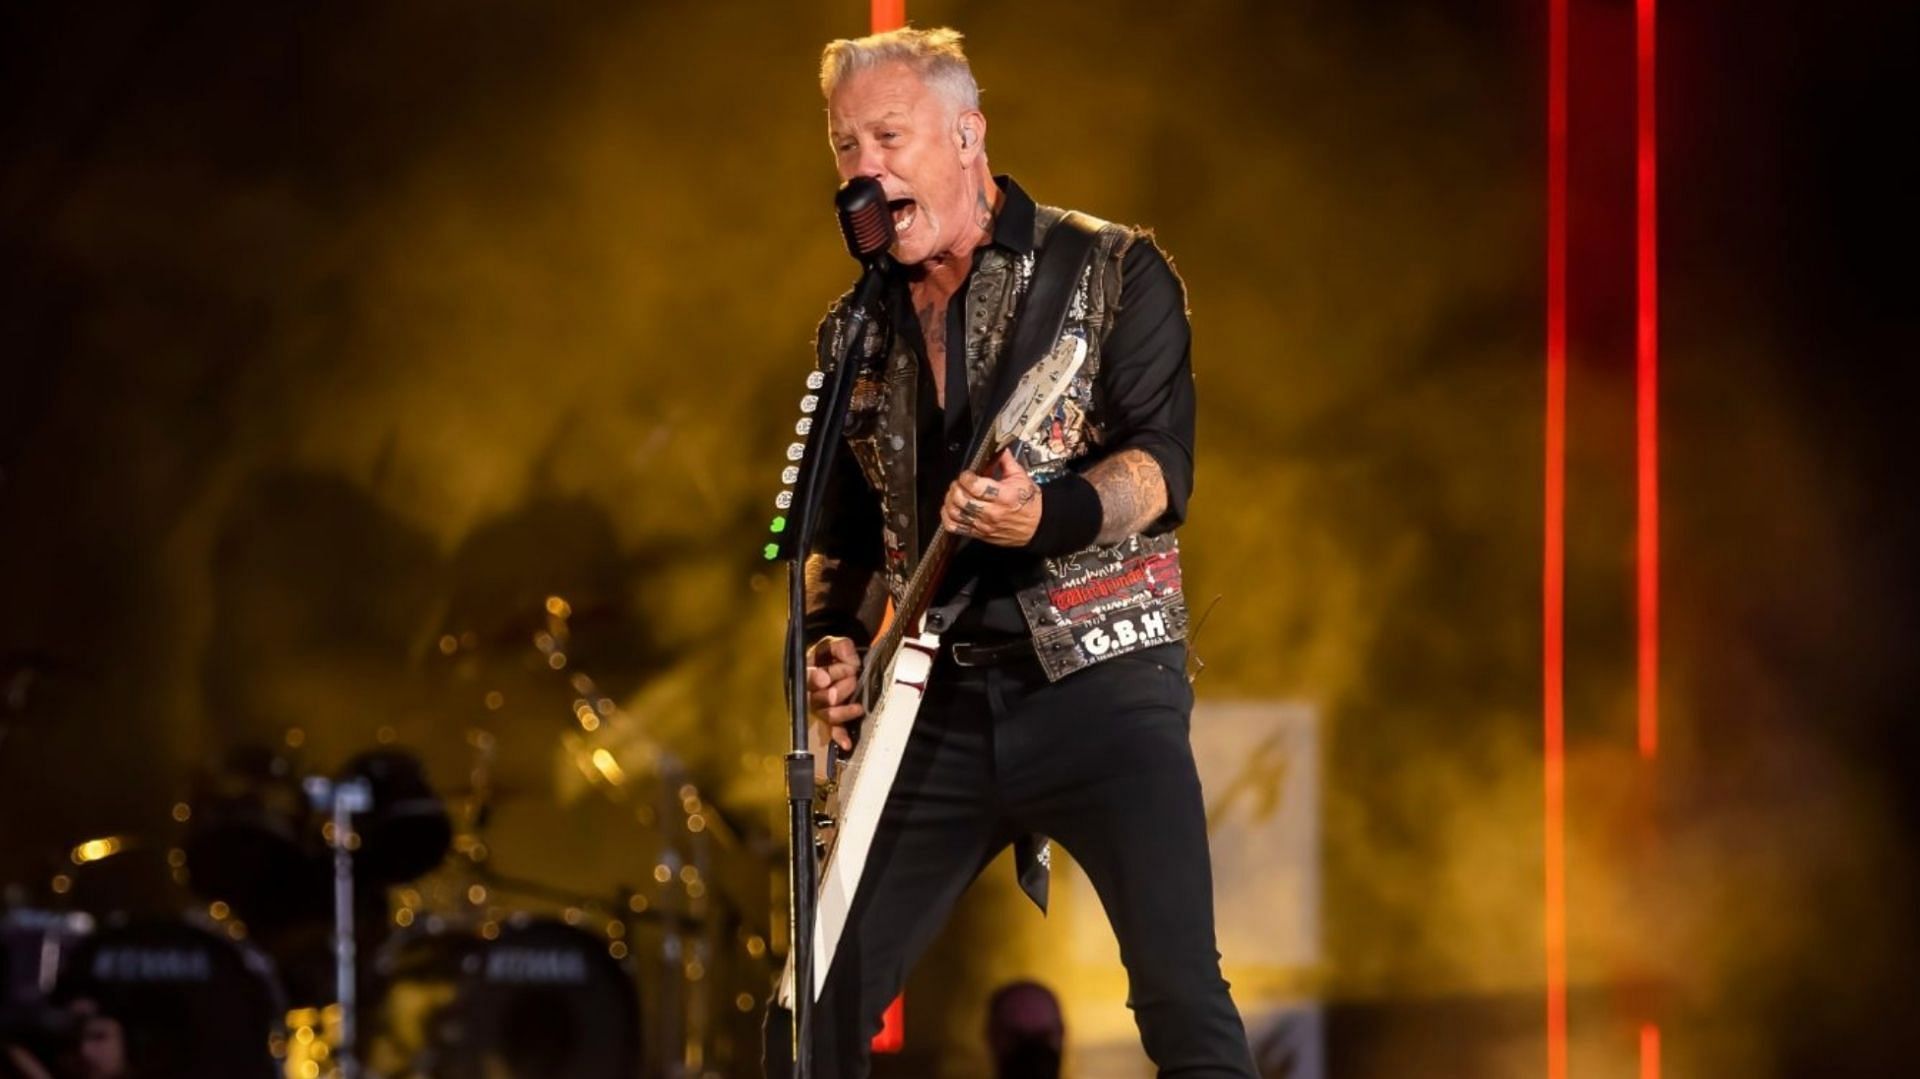 Metallica featured Eddie Munson on a big screen during a concert. (Image via Getty)